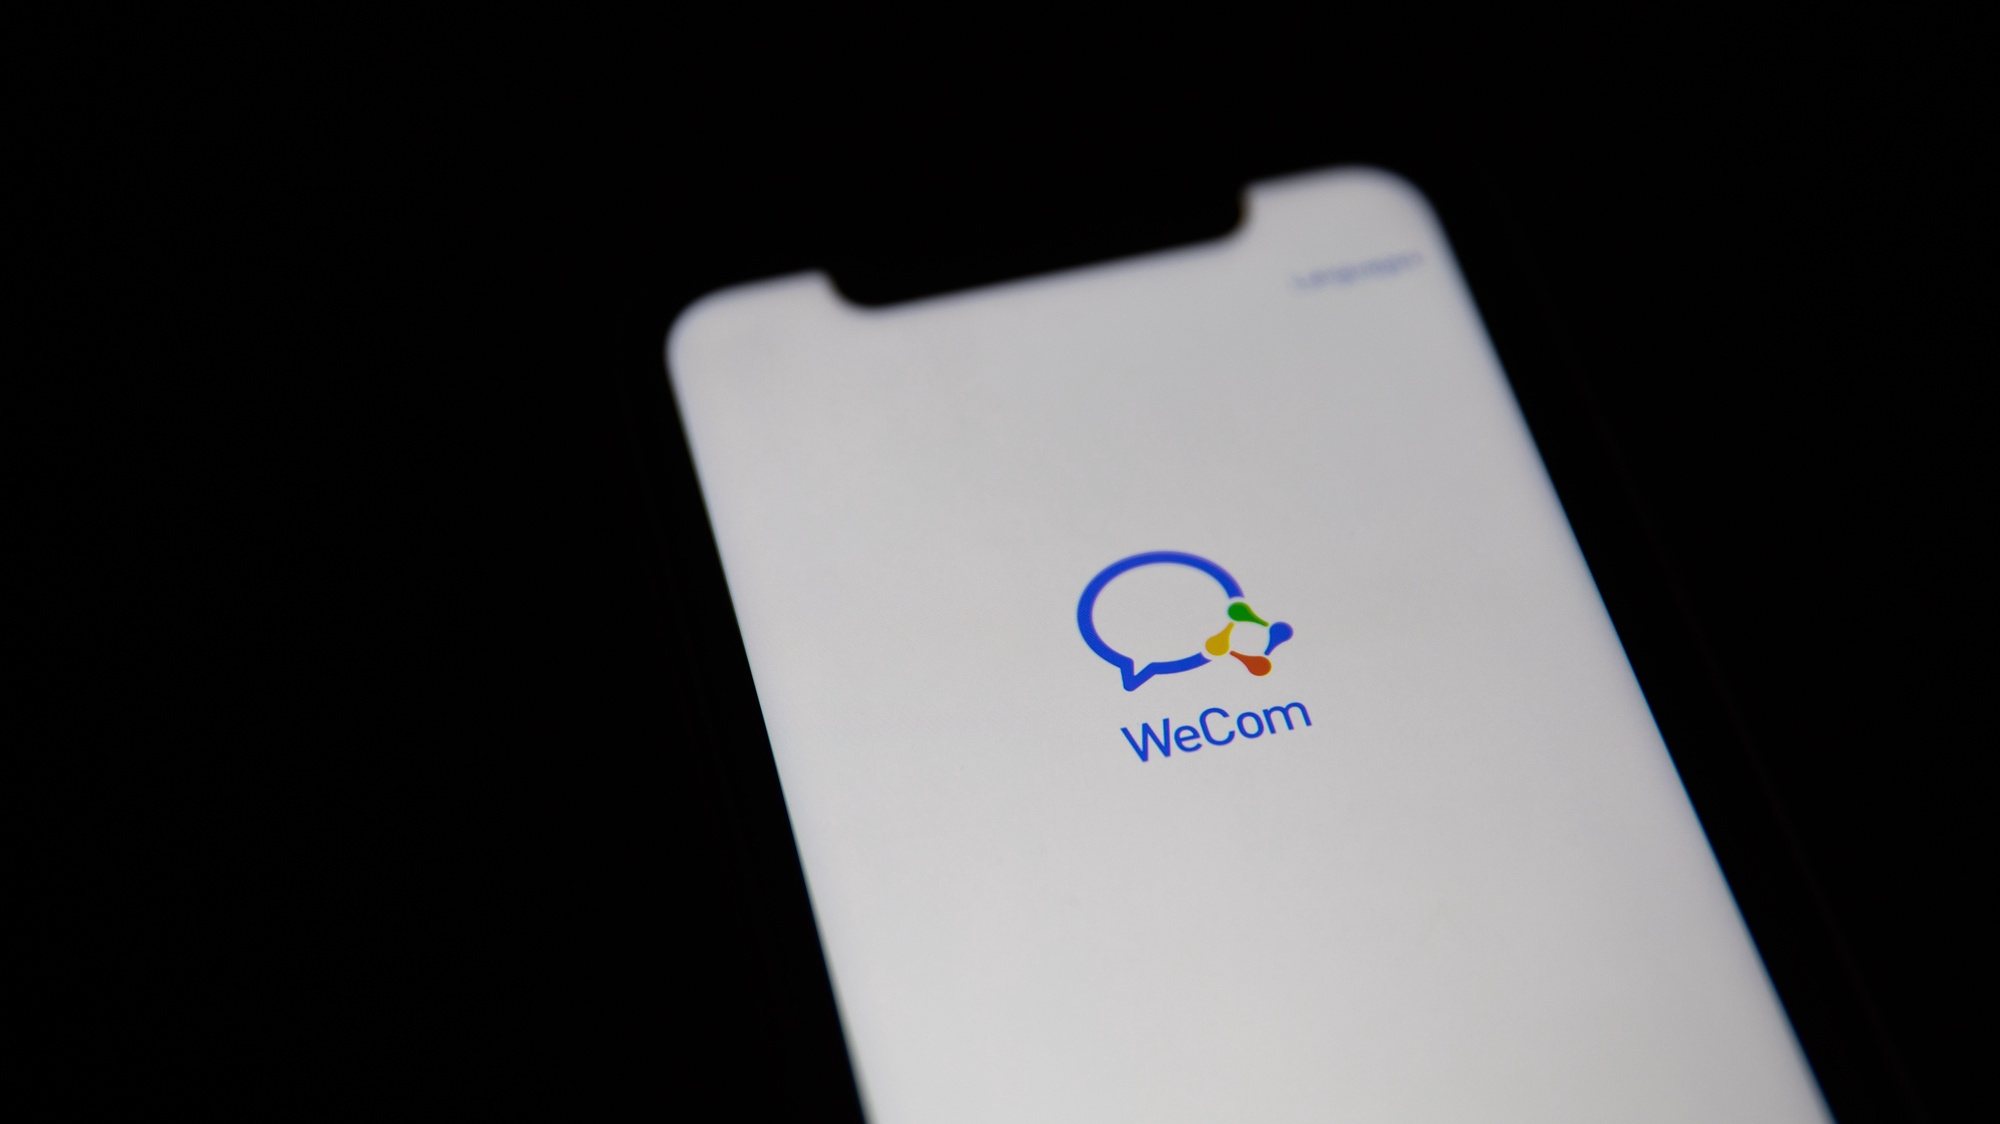 epa08685862 A generic illustration shows the logo of Chinese internet media app WeCom on a phone, in Beijing, China, 21 September 2020. According to media reports, Chinese tech giant Tencent has changed the name of its WeChat Work office collaboration app to WeCom, as an alternative to its WeChat app which was set to stop operation in the U.S. on midnight 20 September 2020.  EPA/ROMAN PILIPEY